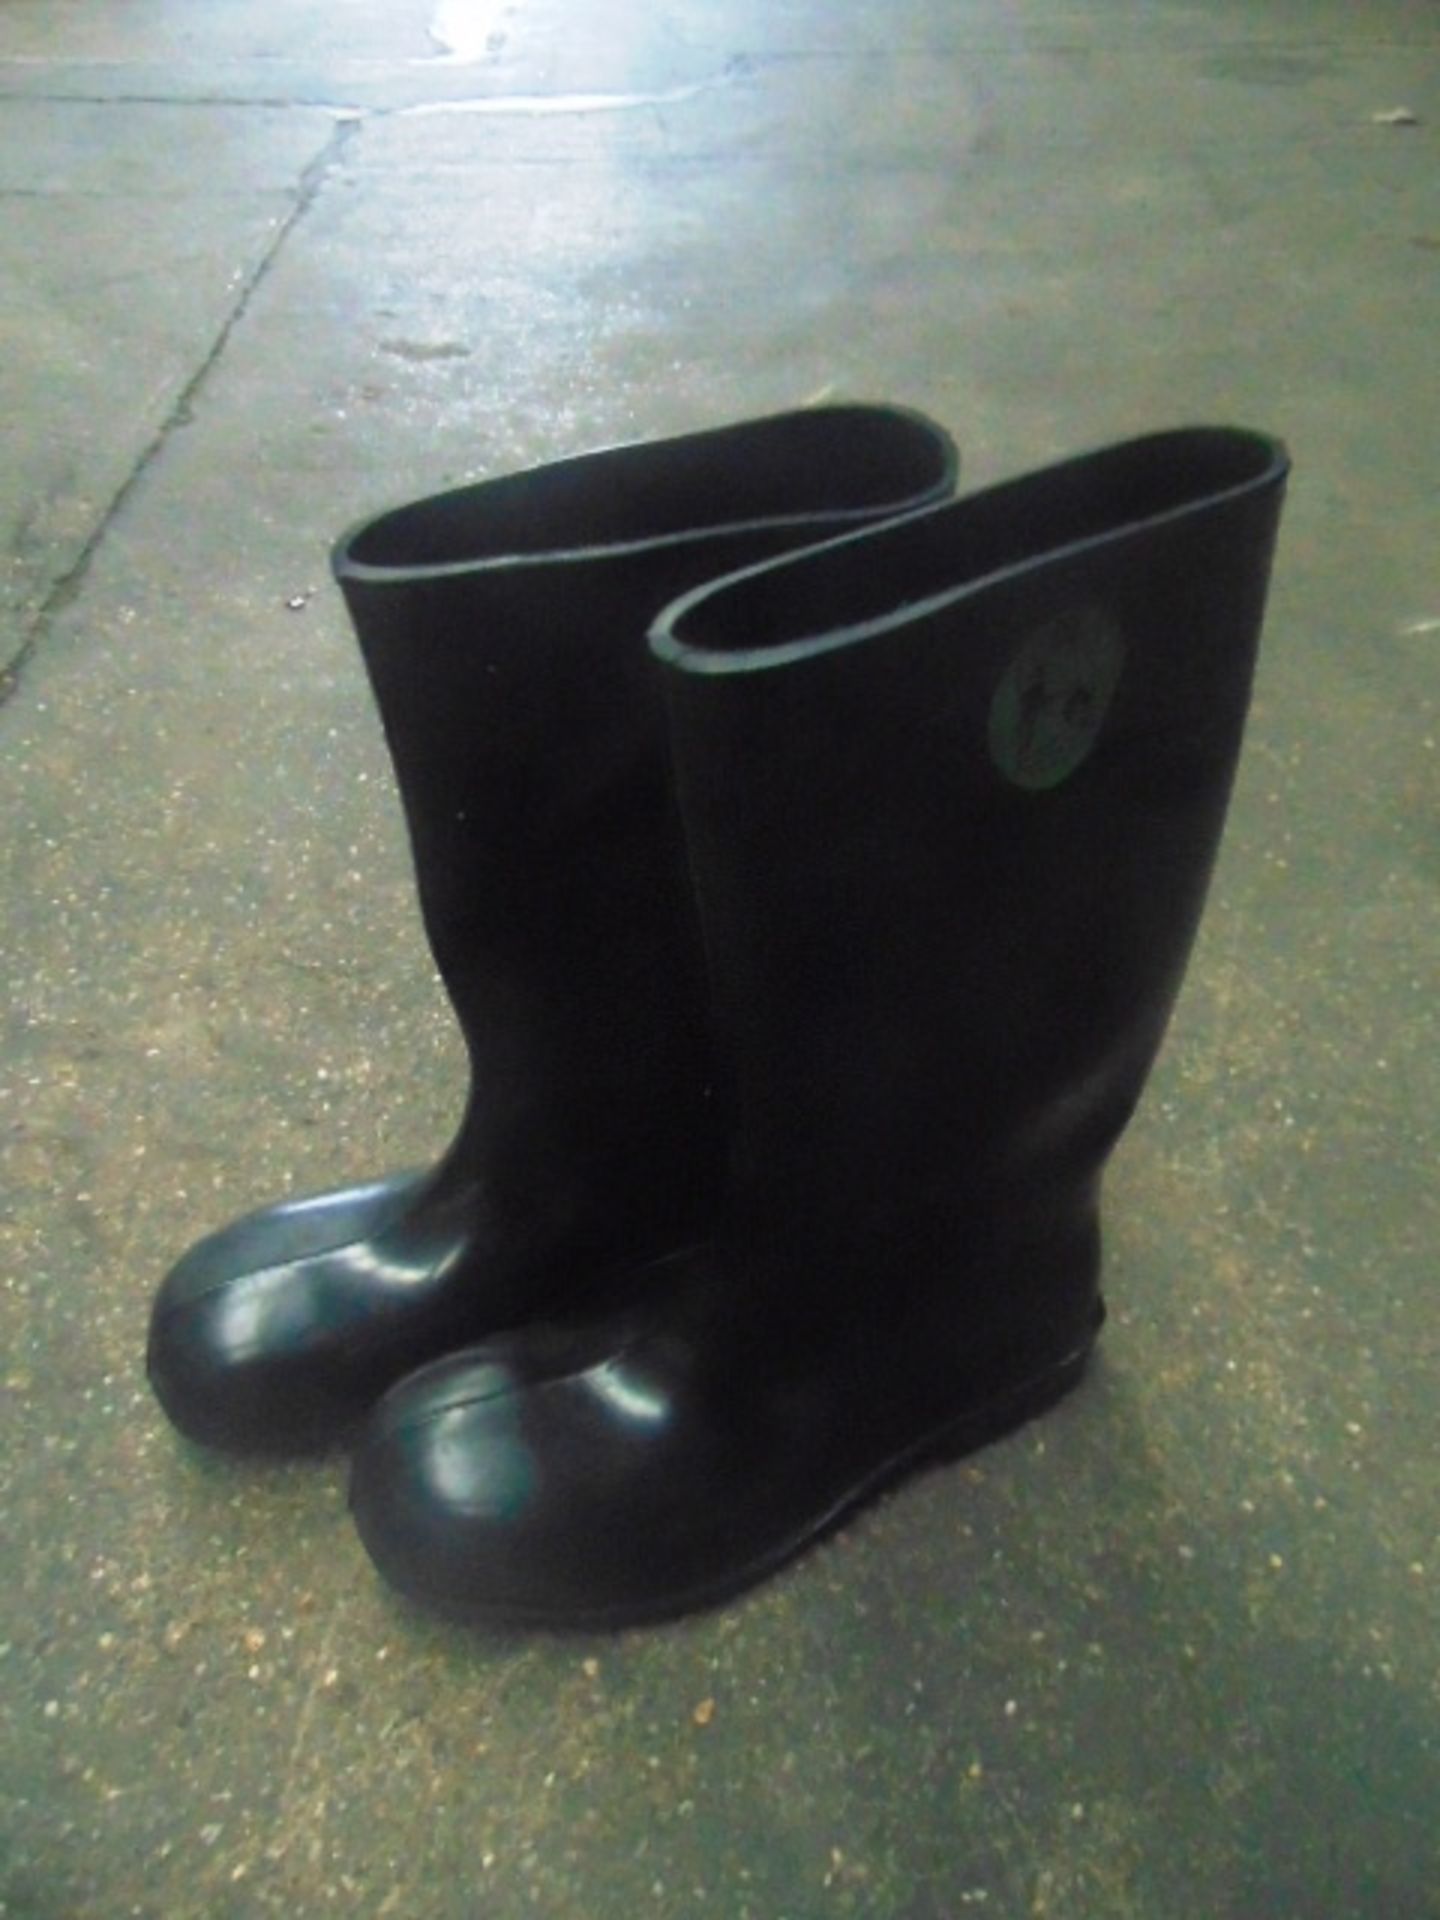 6 x Unissued Pairs of Bekina L400/88 Rubber Safety Boots wit Non Metallic Toe Cap and Mid Sole - Image 2 of 11